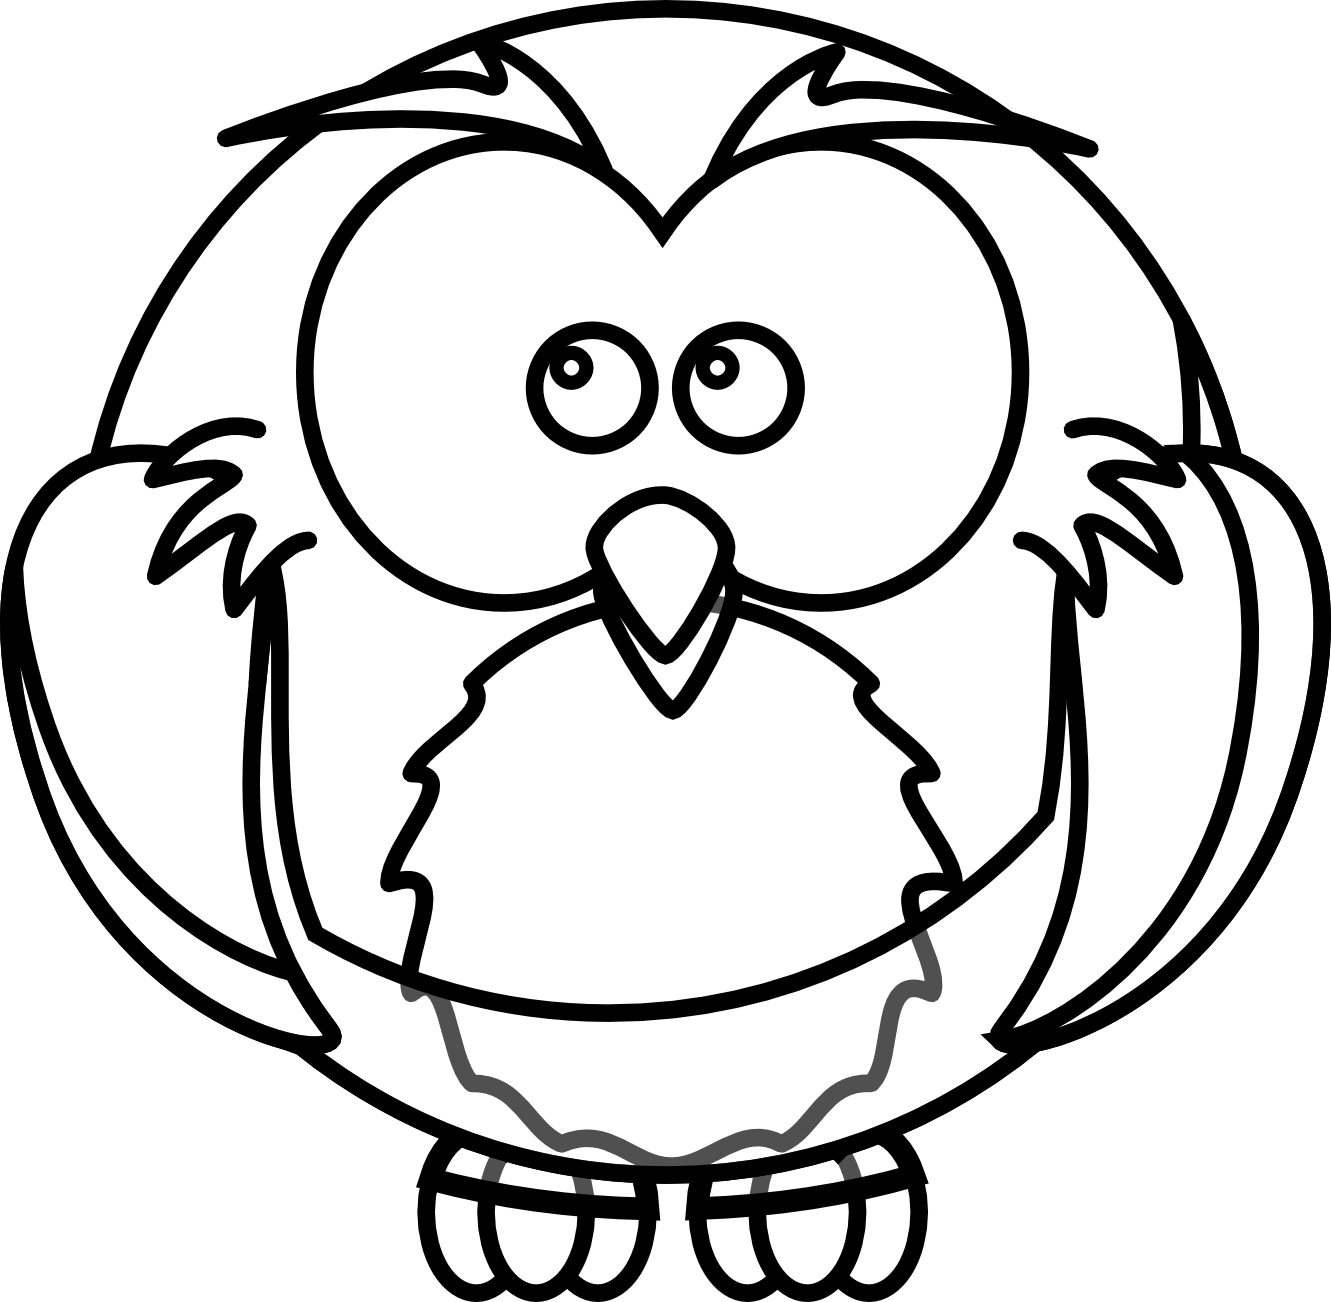 Black And White Owl Clip Art - Clipart library